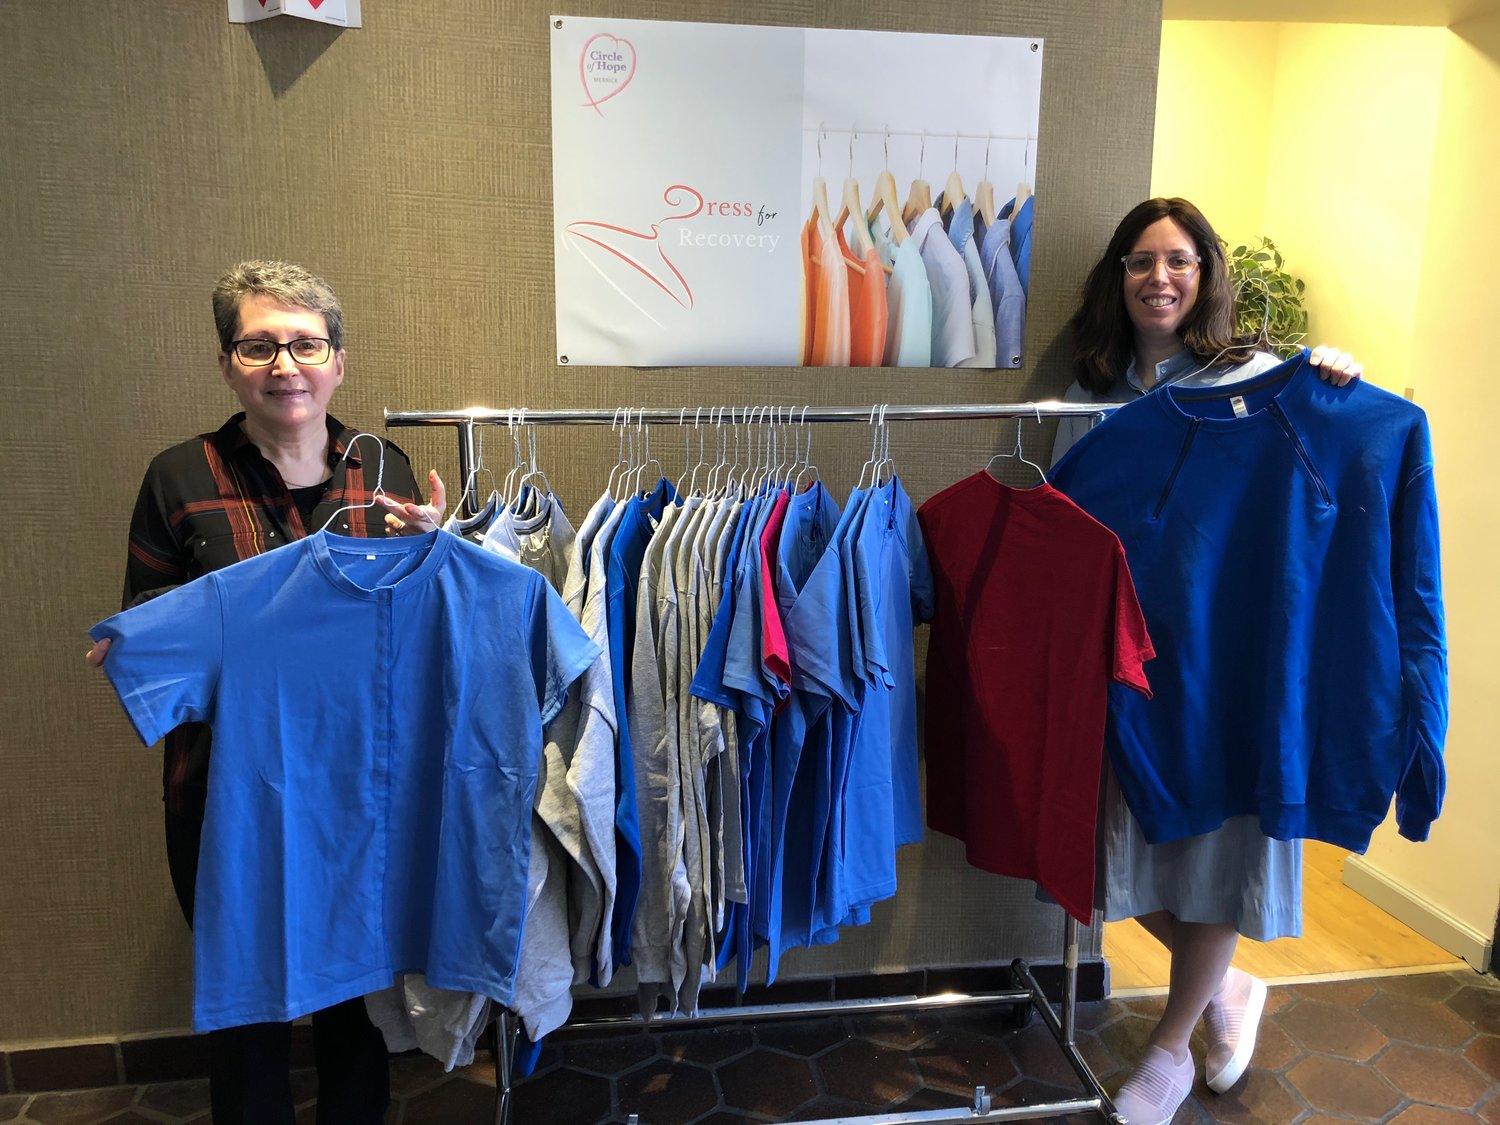 Breast cancer survivor Loraine Alderman, left, started Dress for Recovery, a clothing bank that will offer specially designed clothing for those undergoing breast cancer treatments. The initiative is part of the Chabad Center for Jewish Life’s Circle of Hope, which is run by Chanie Kramer, right.